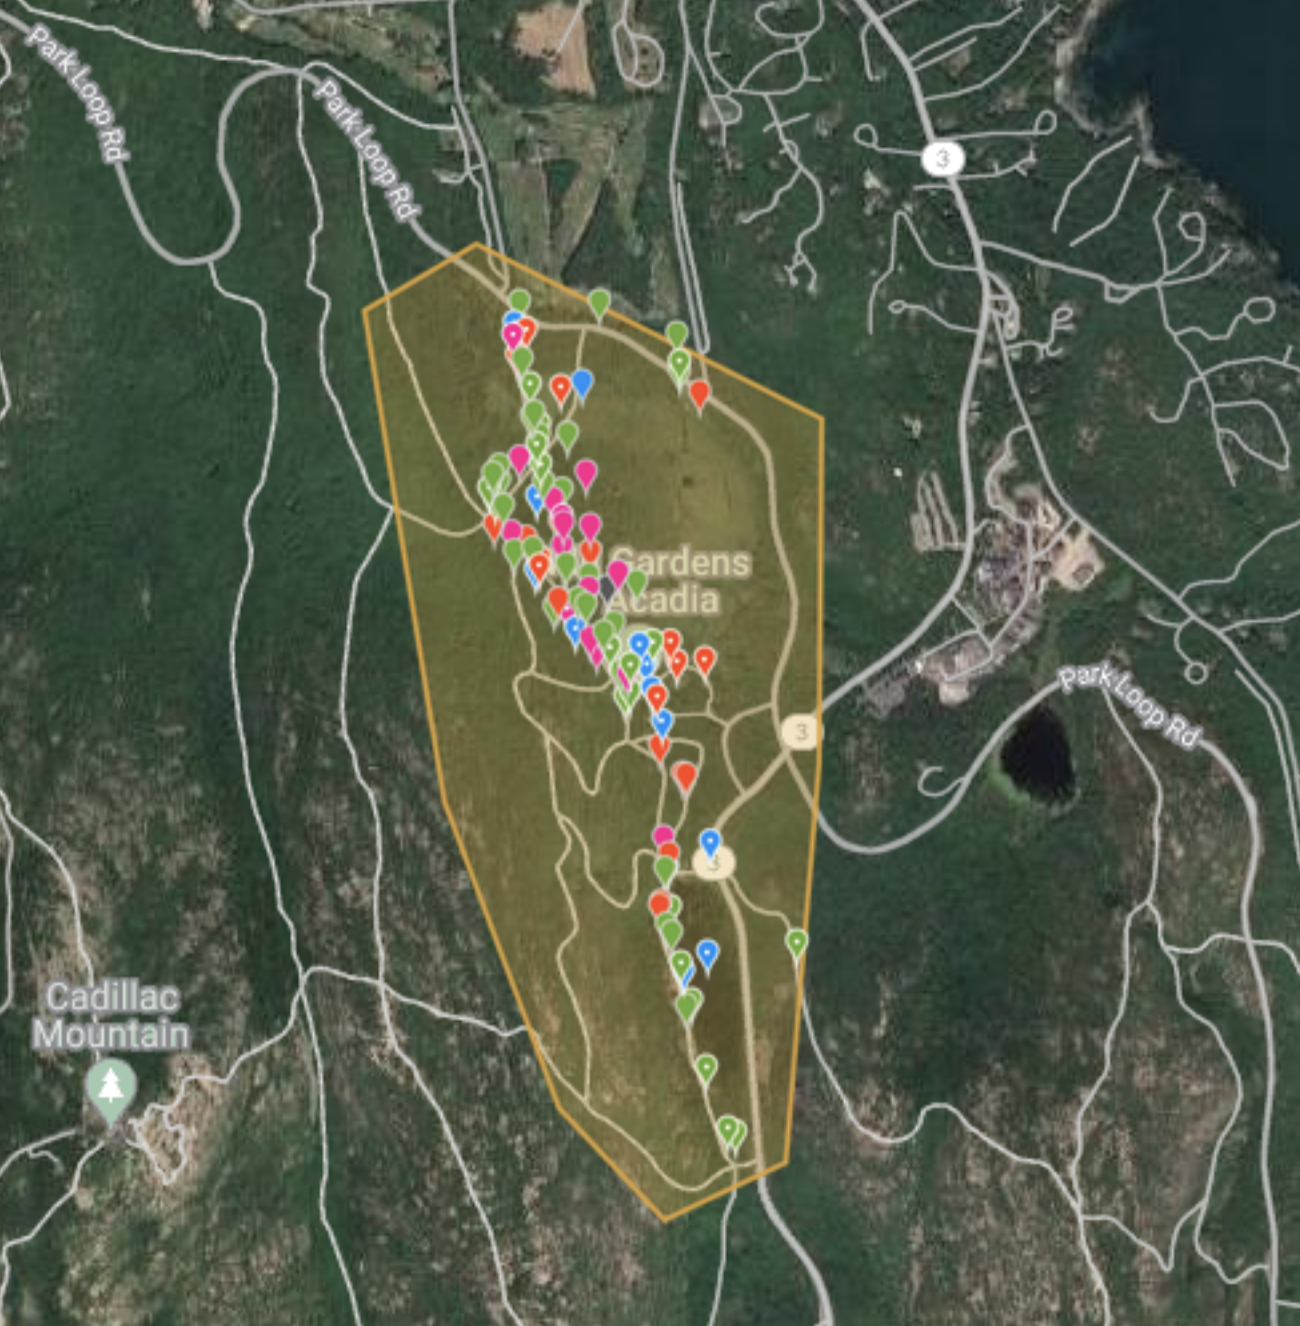 Map of the iNaturalist observations from the Great Meadow trail complex in Acadia National Park.